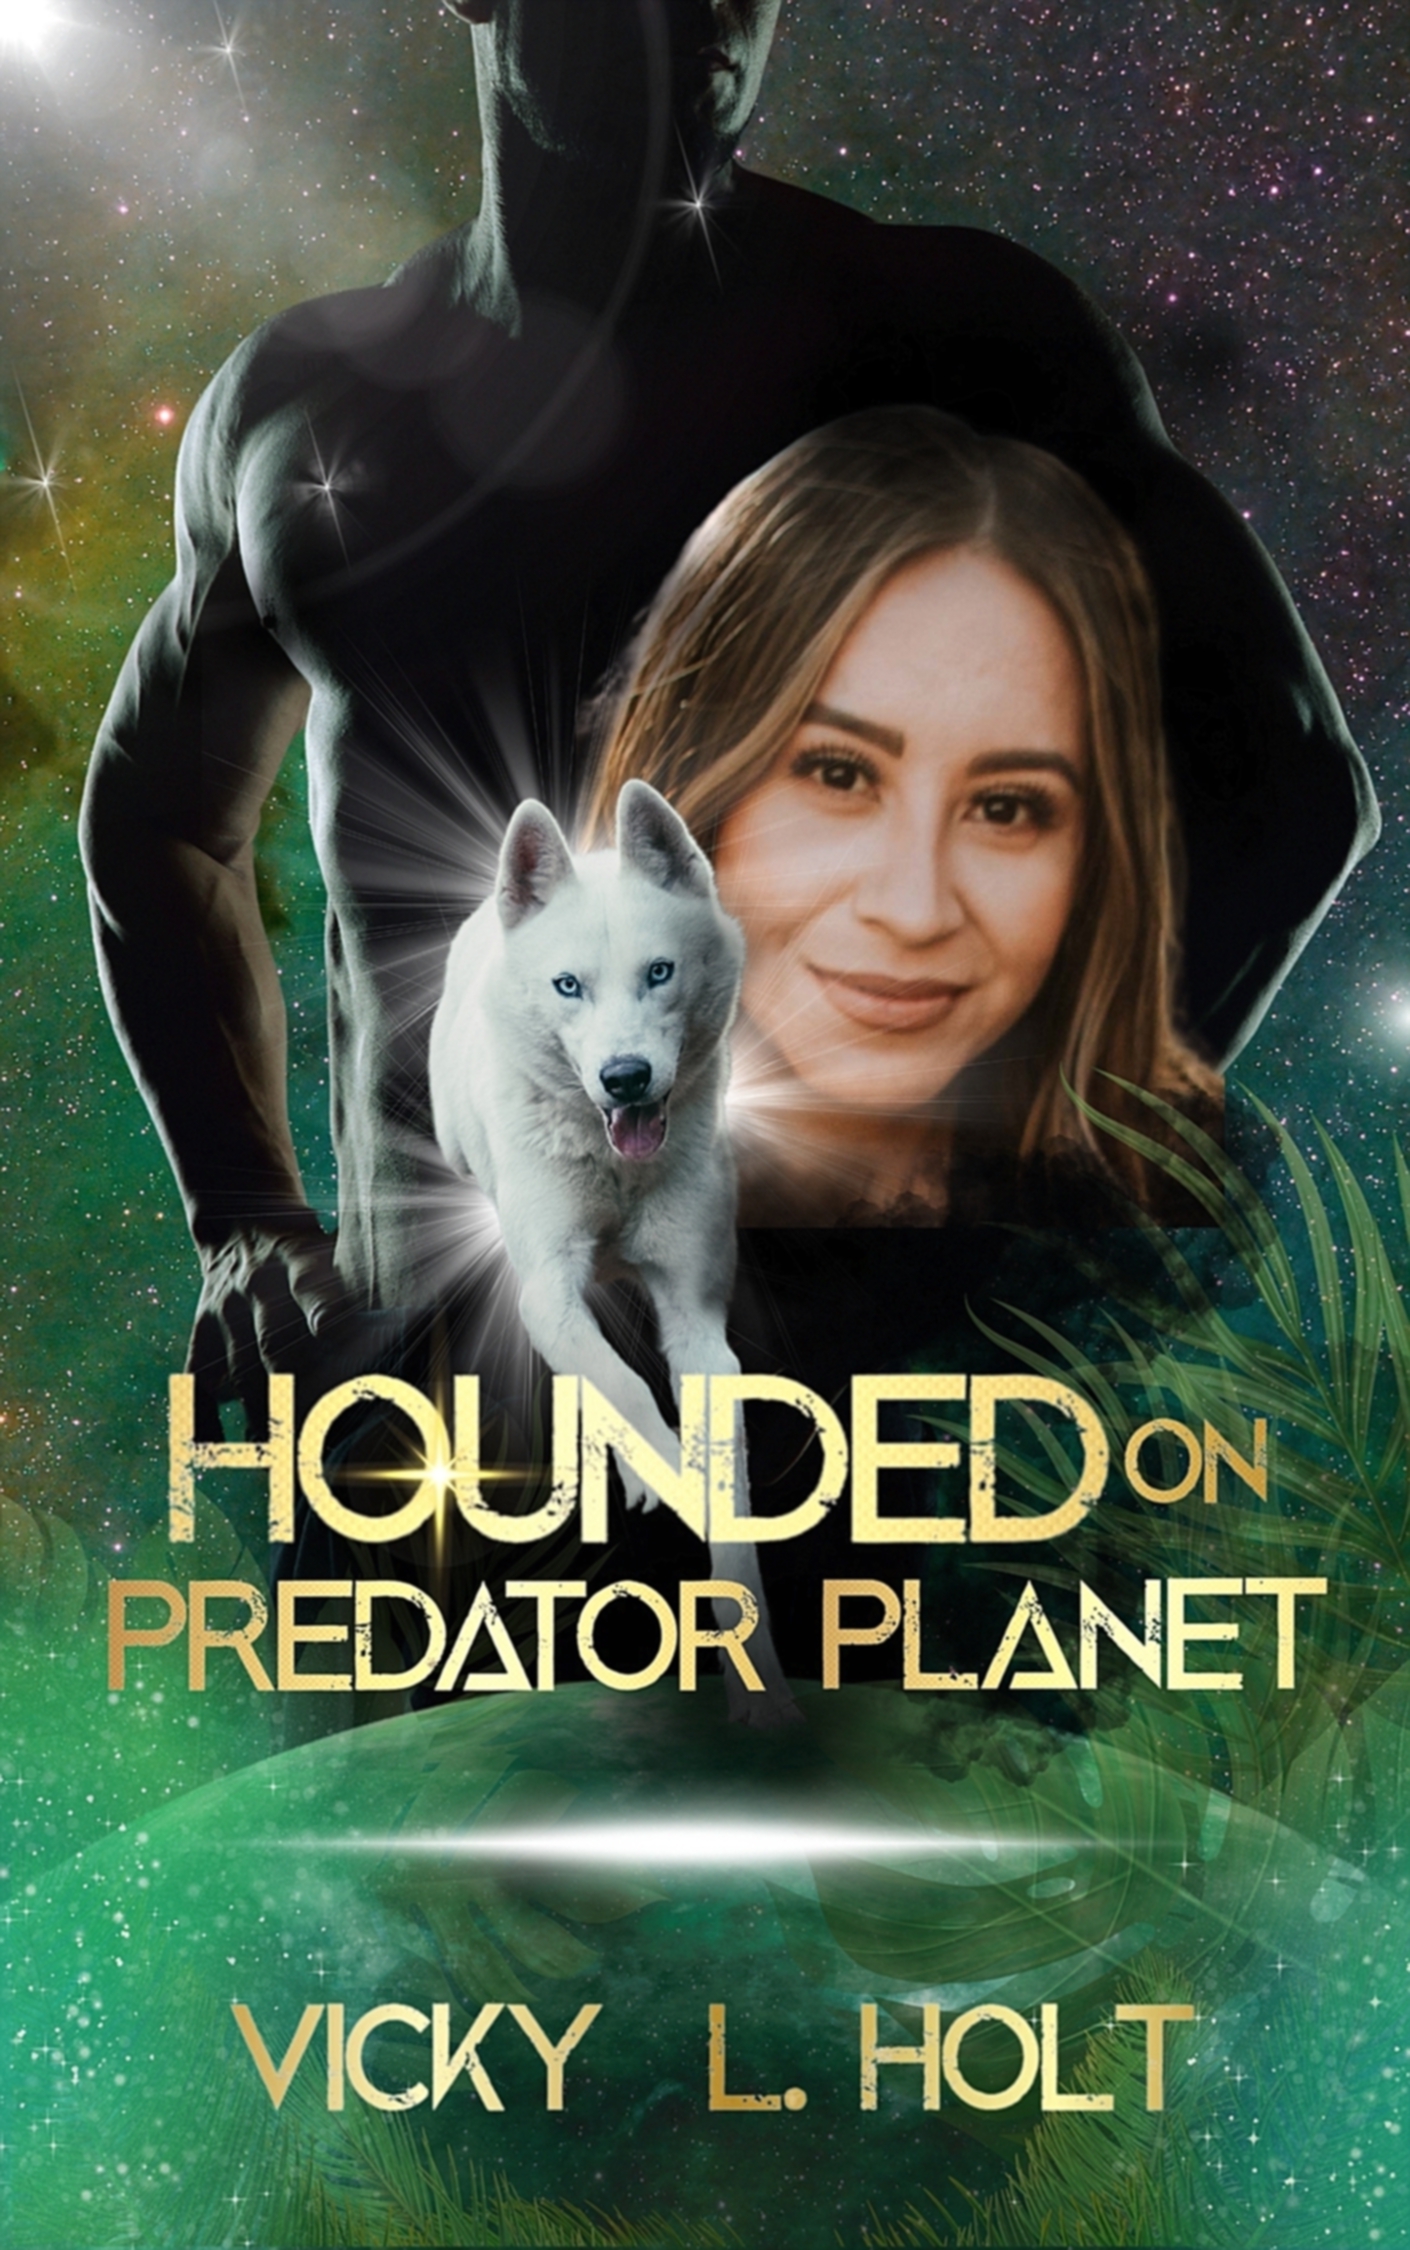 The cover of the book, Hounded on Predator Planet, features a running white wolf and a smiling hispanic/LatinX woman